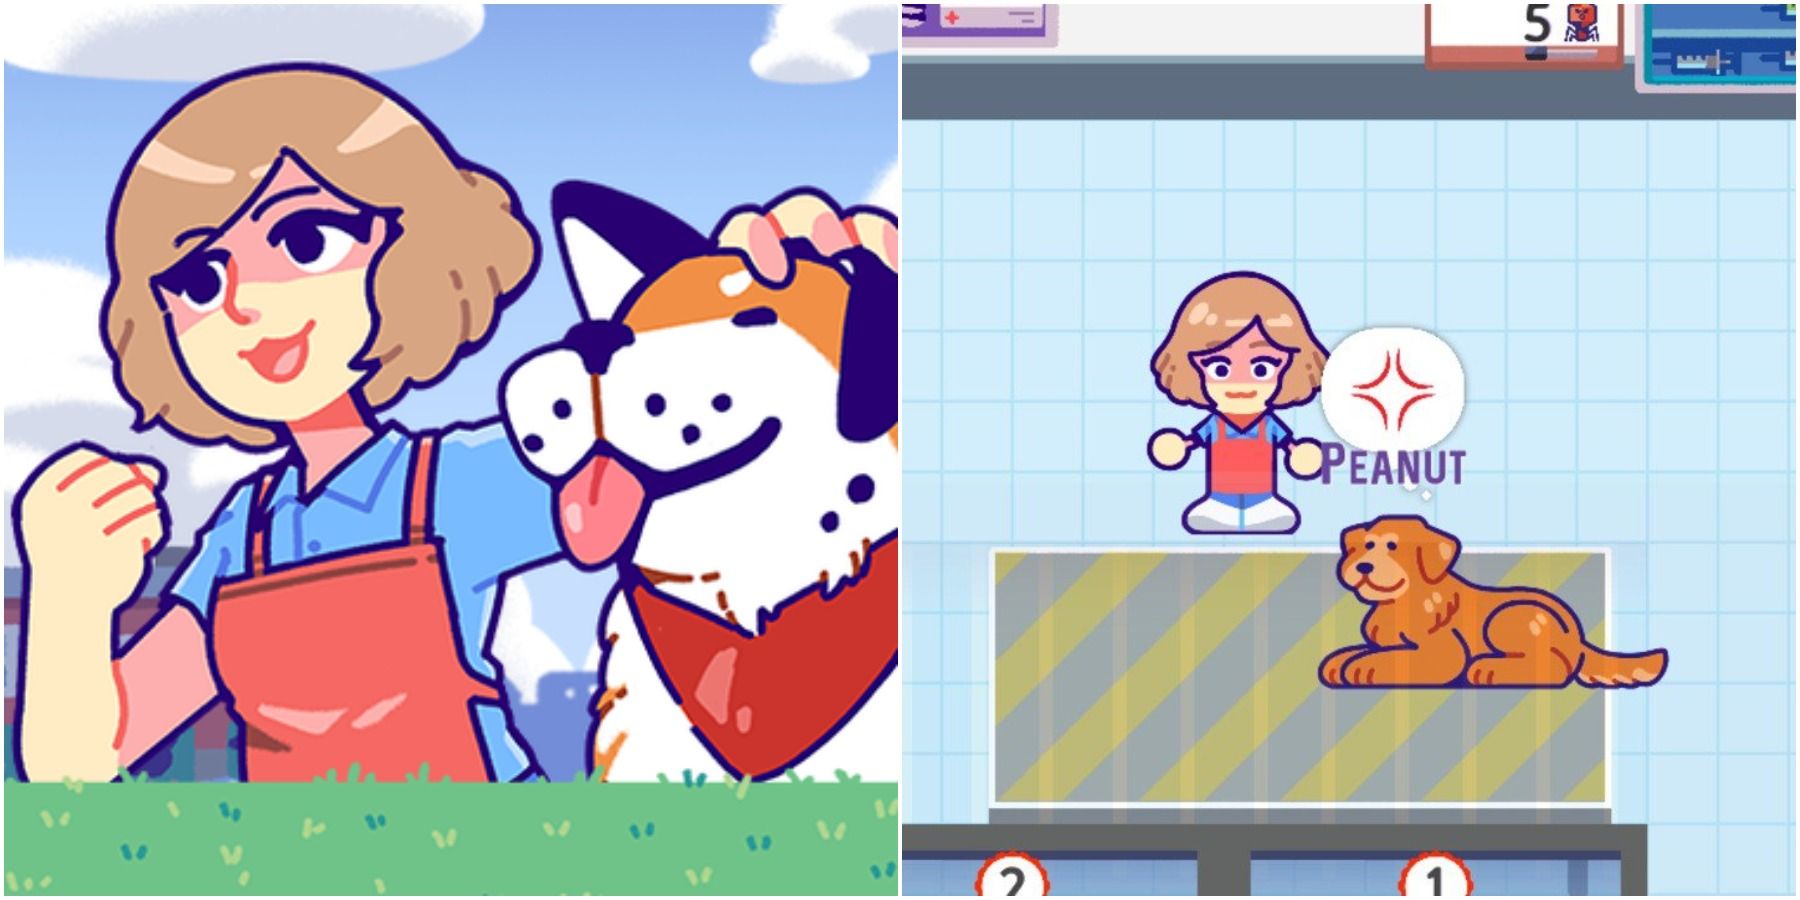 Split image of character with dog in game art and in game.